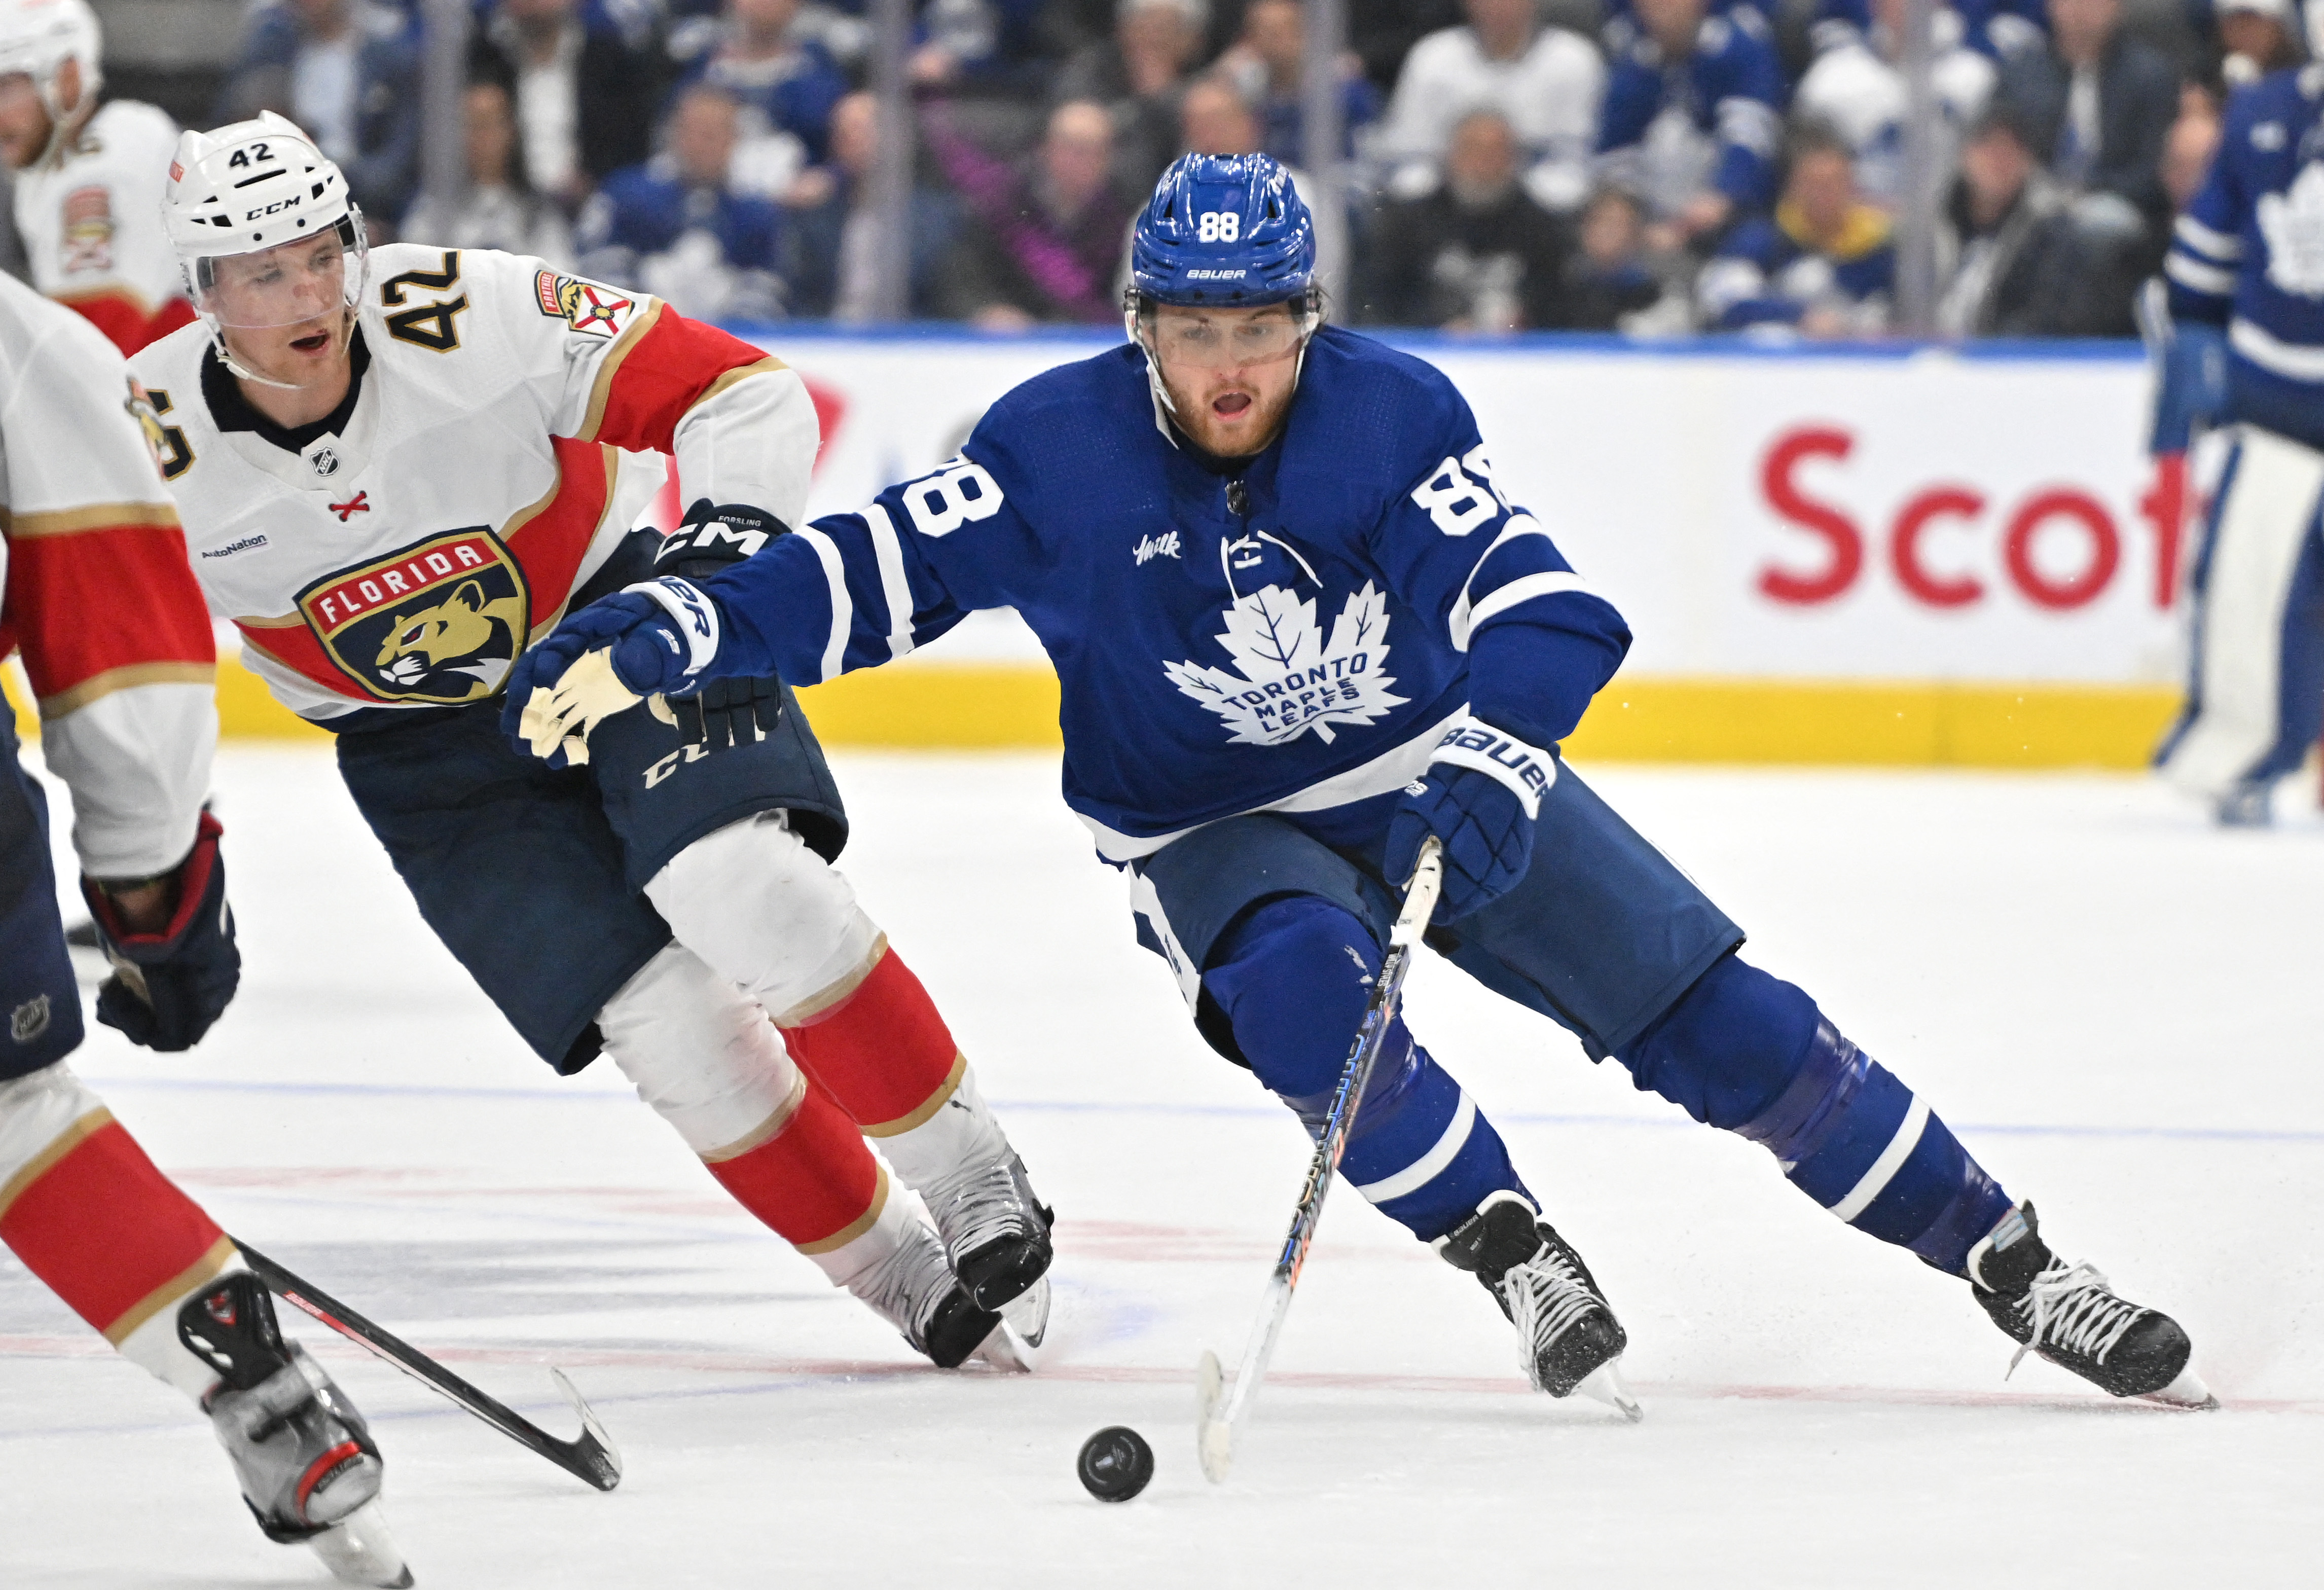 OT win gives Panthers 3-0 lead over Maple Leafs